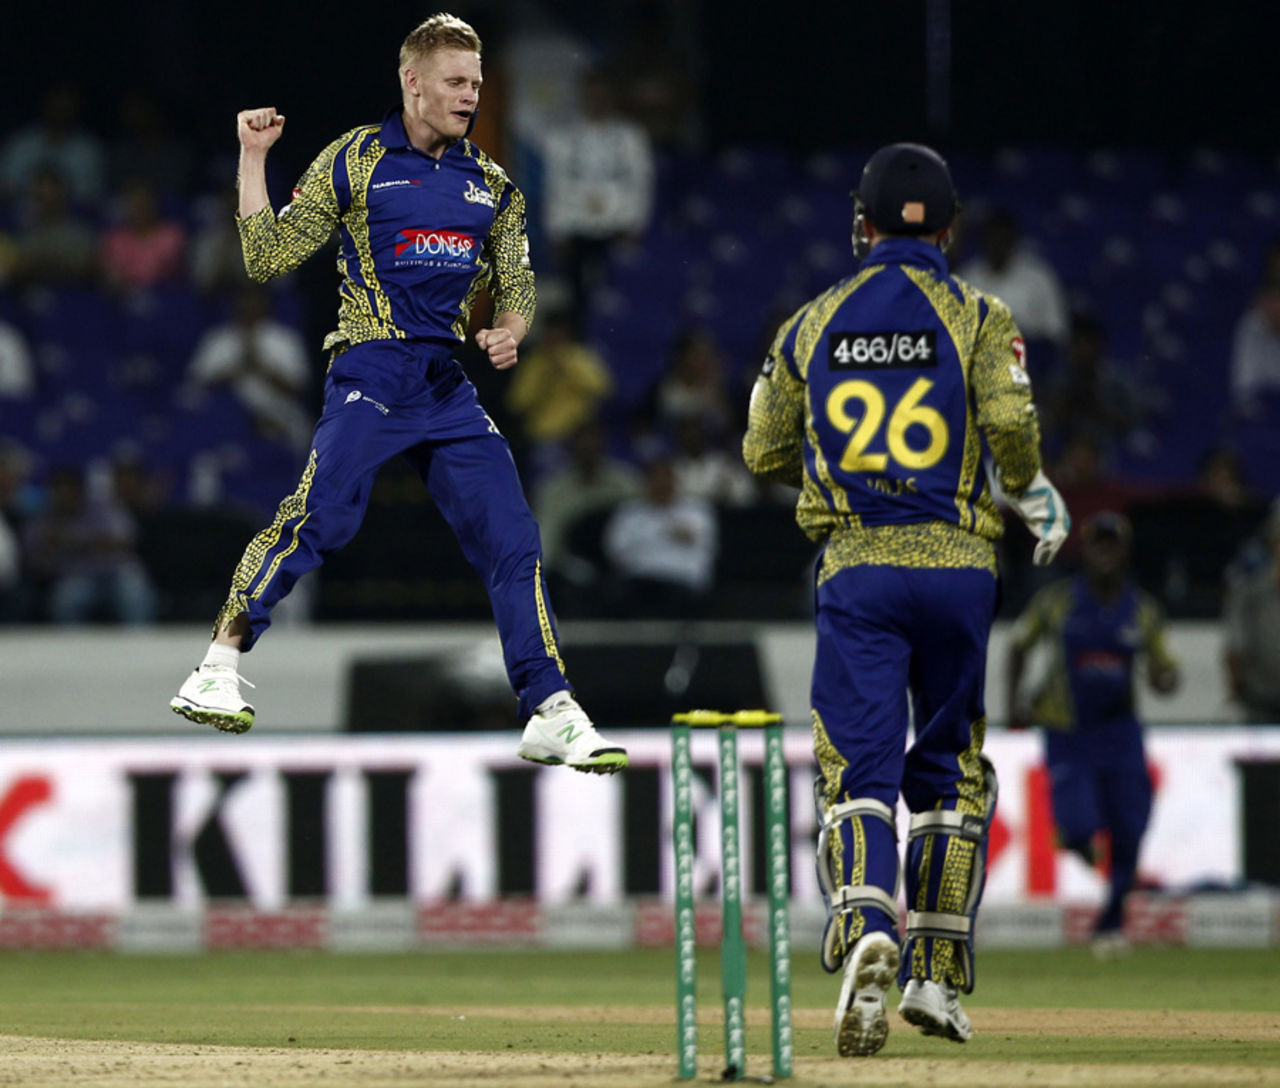 Sybrand Engelbrecht took three wickets with his offspin, Cape Cobras v Hobart Hurricanes, Champions League T20, Hyderabad, September 21, 2014